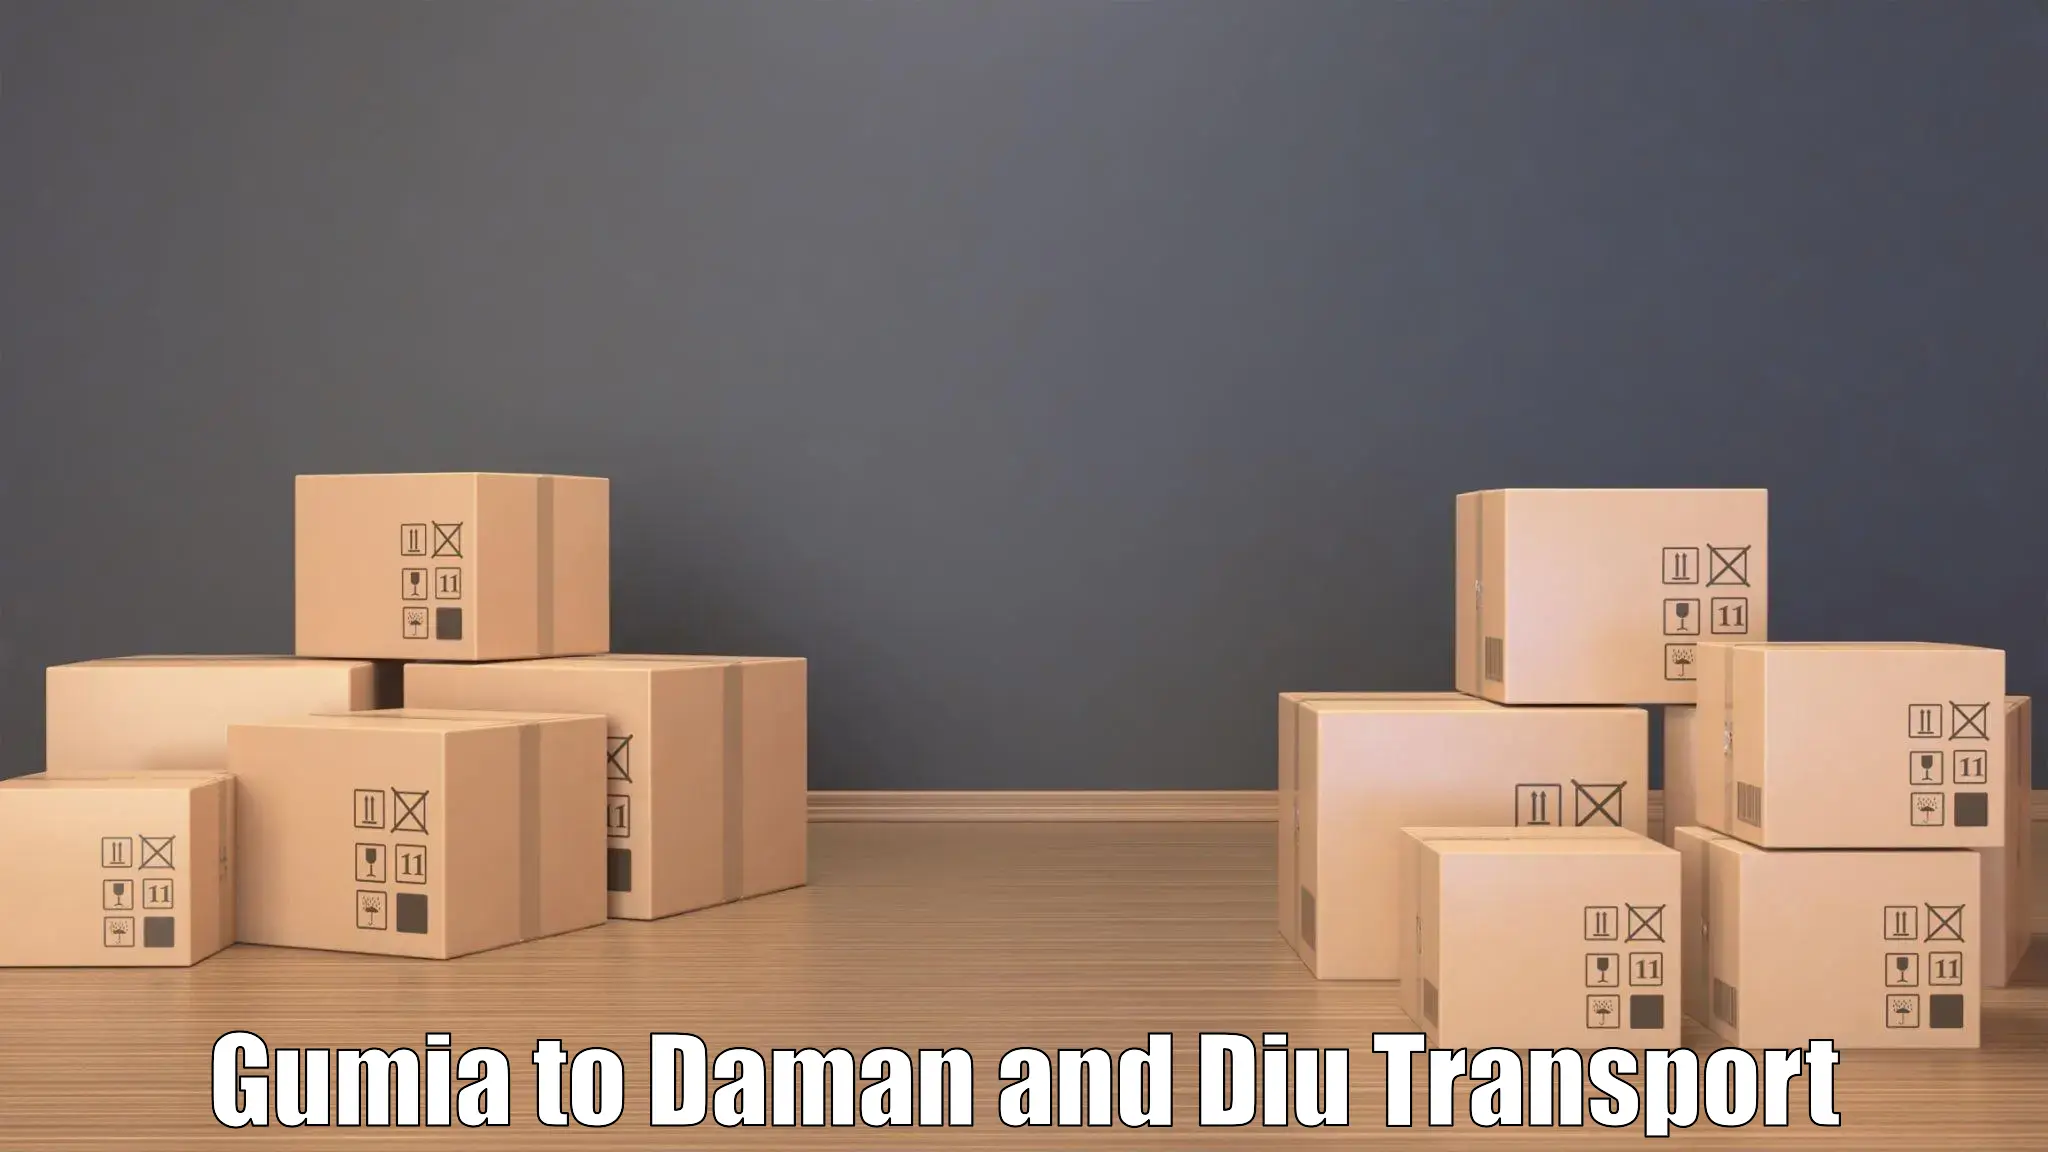 Lorry transport service Gumia to Daman and Diu